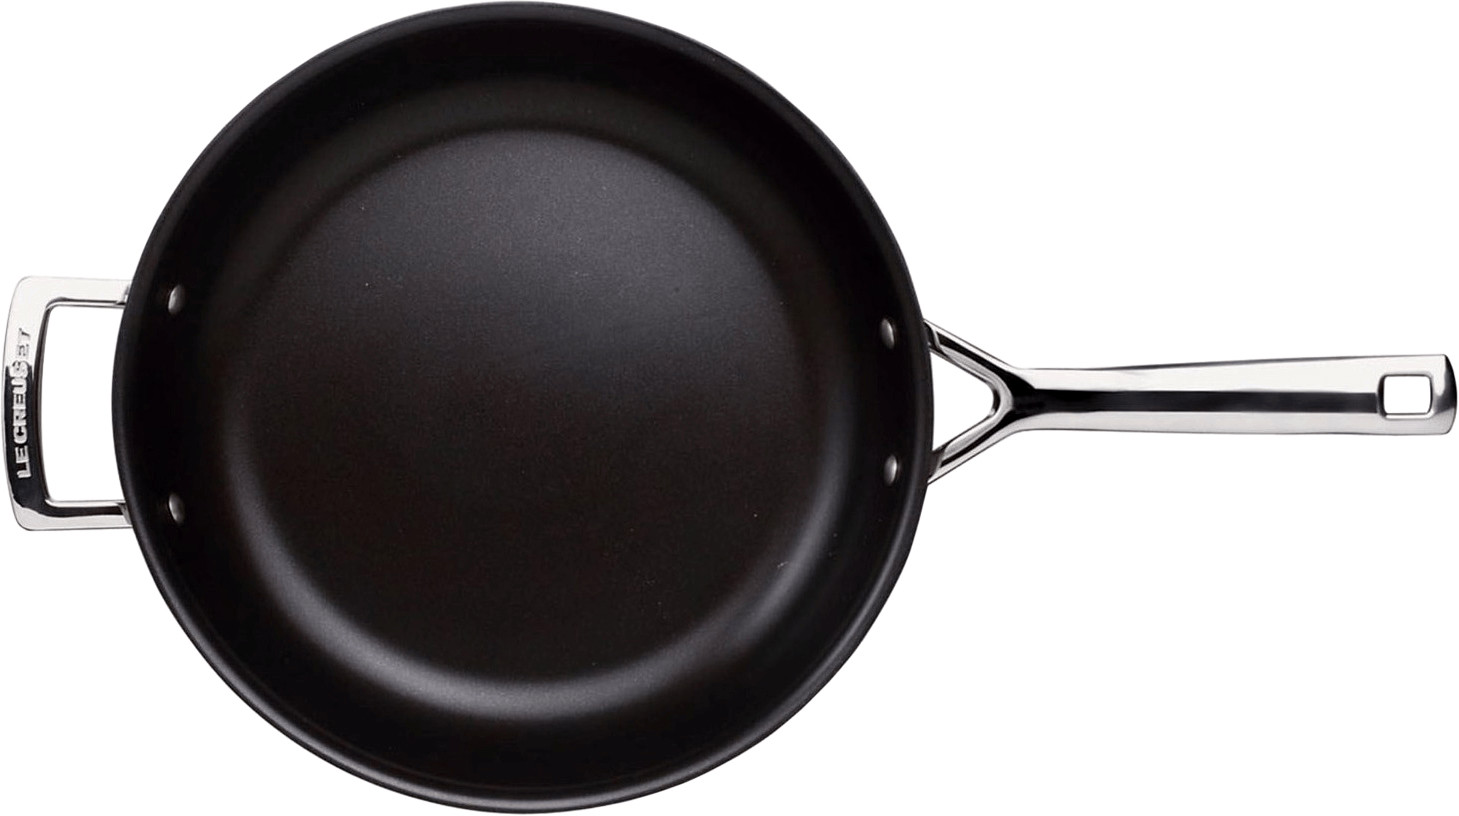 Le Creuset 3-Ply Stainless Steel 28cm Non-Stick Frying Pan